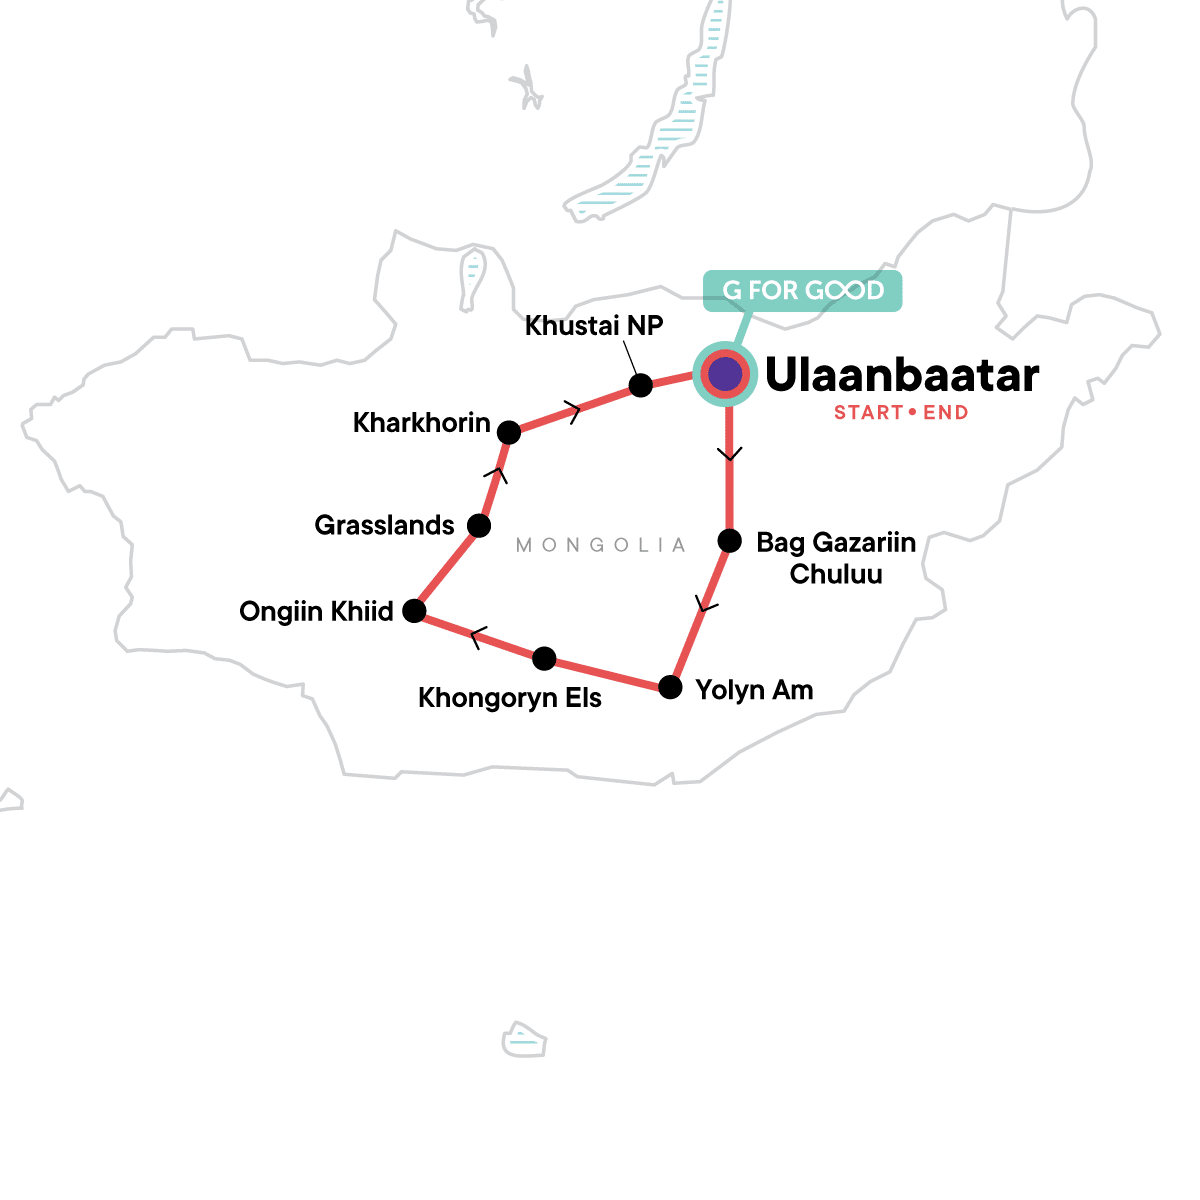 A map of the tour begins in Ulaanbaatar. It then shows the route clockwise around Mongolia with the following stops: Bag Gazariin Chuluu, Yolyn Am, Khongoryn Els, Ongiin Khiid, grasslands, Kharkhorin, and Khustai National Park. The final destination is back in Ulaanbaatar.